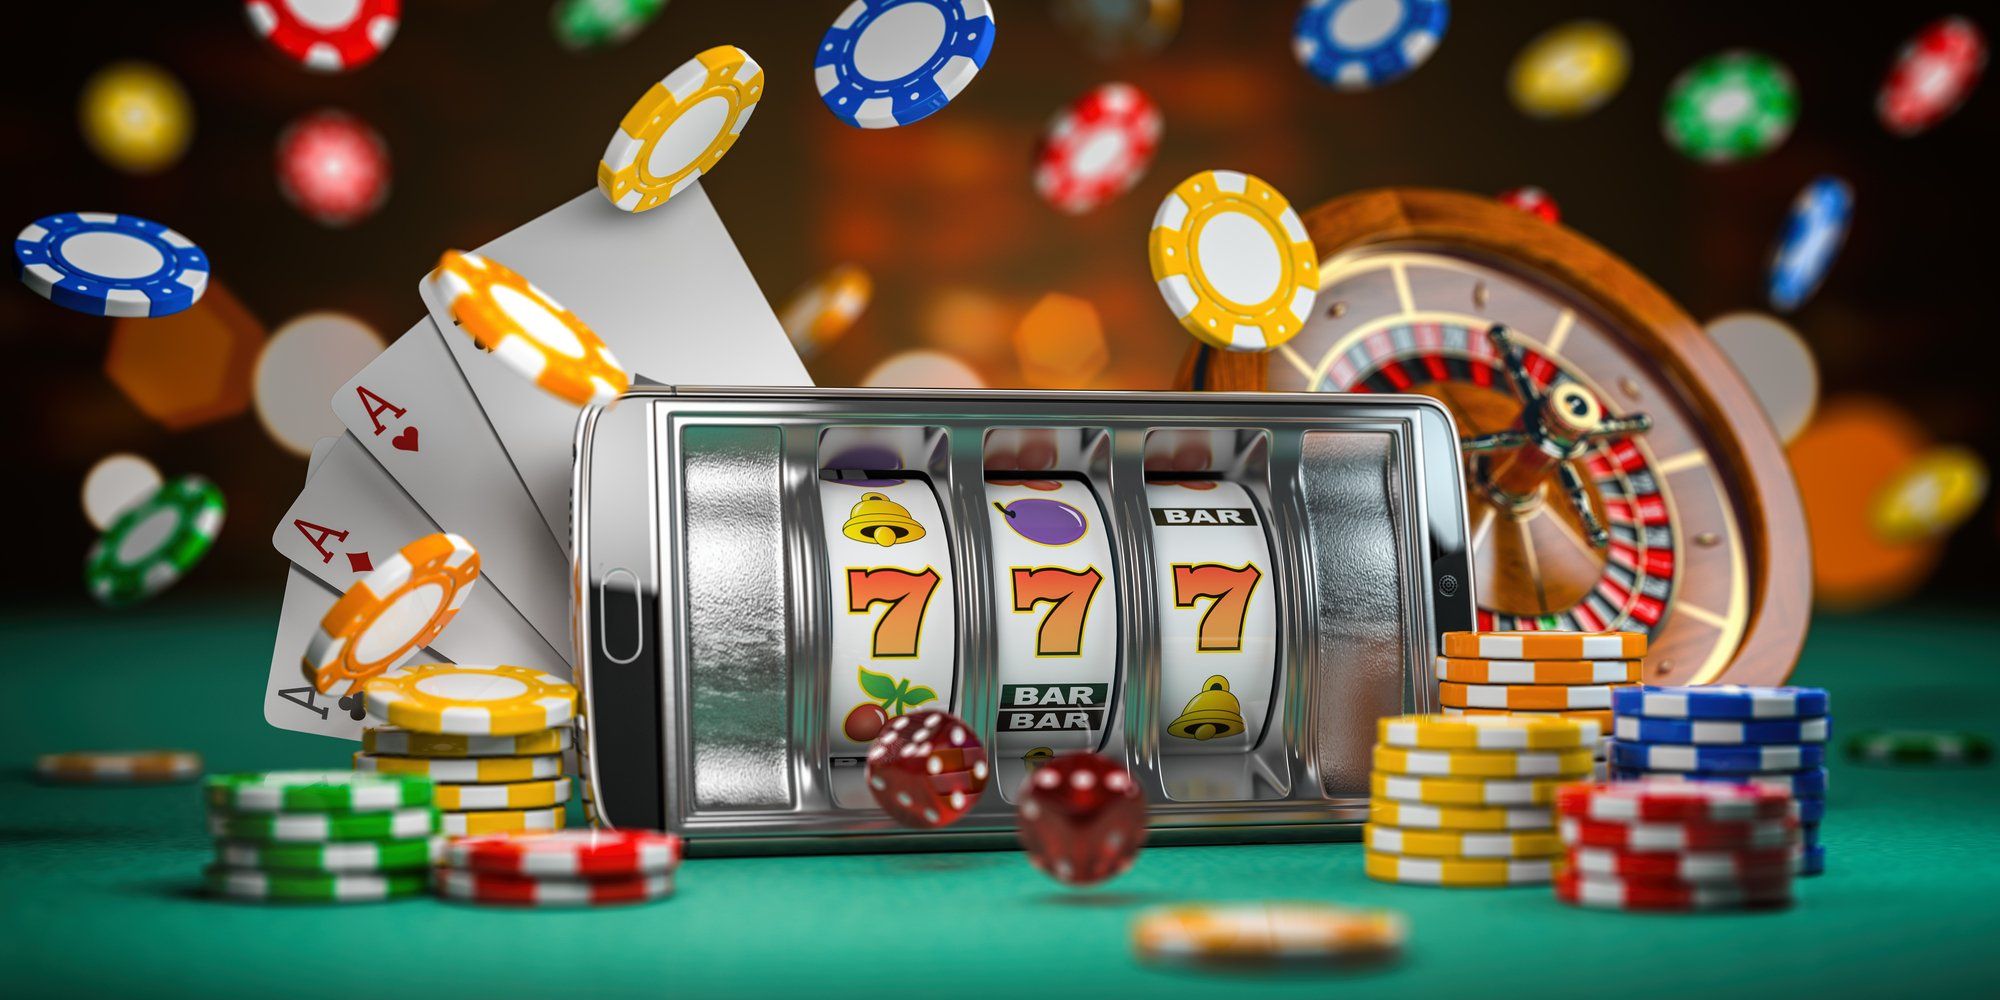 Huuuge Casino gaming apps on smartphone